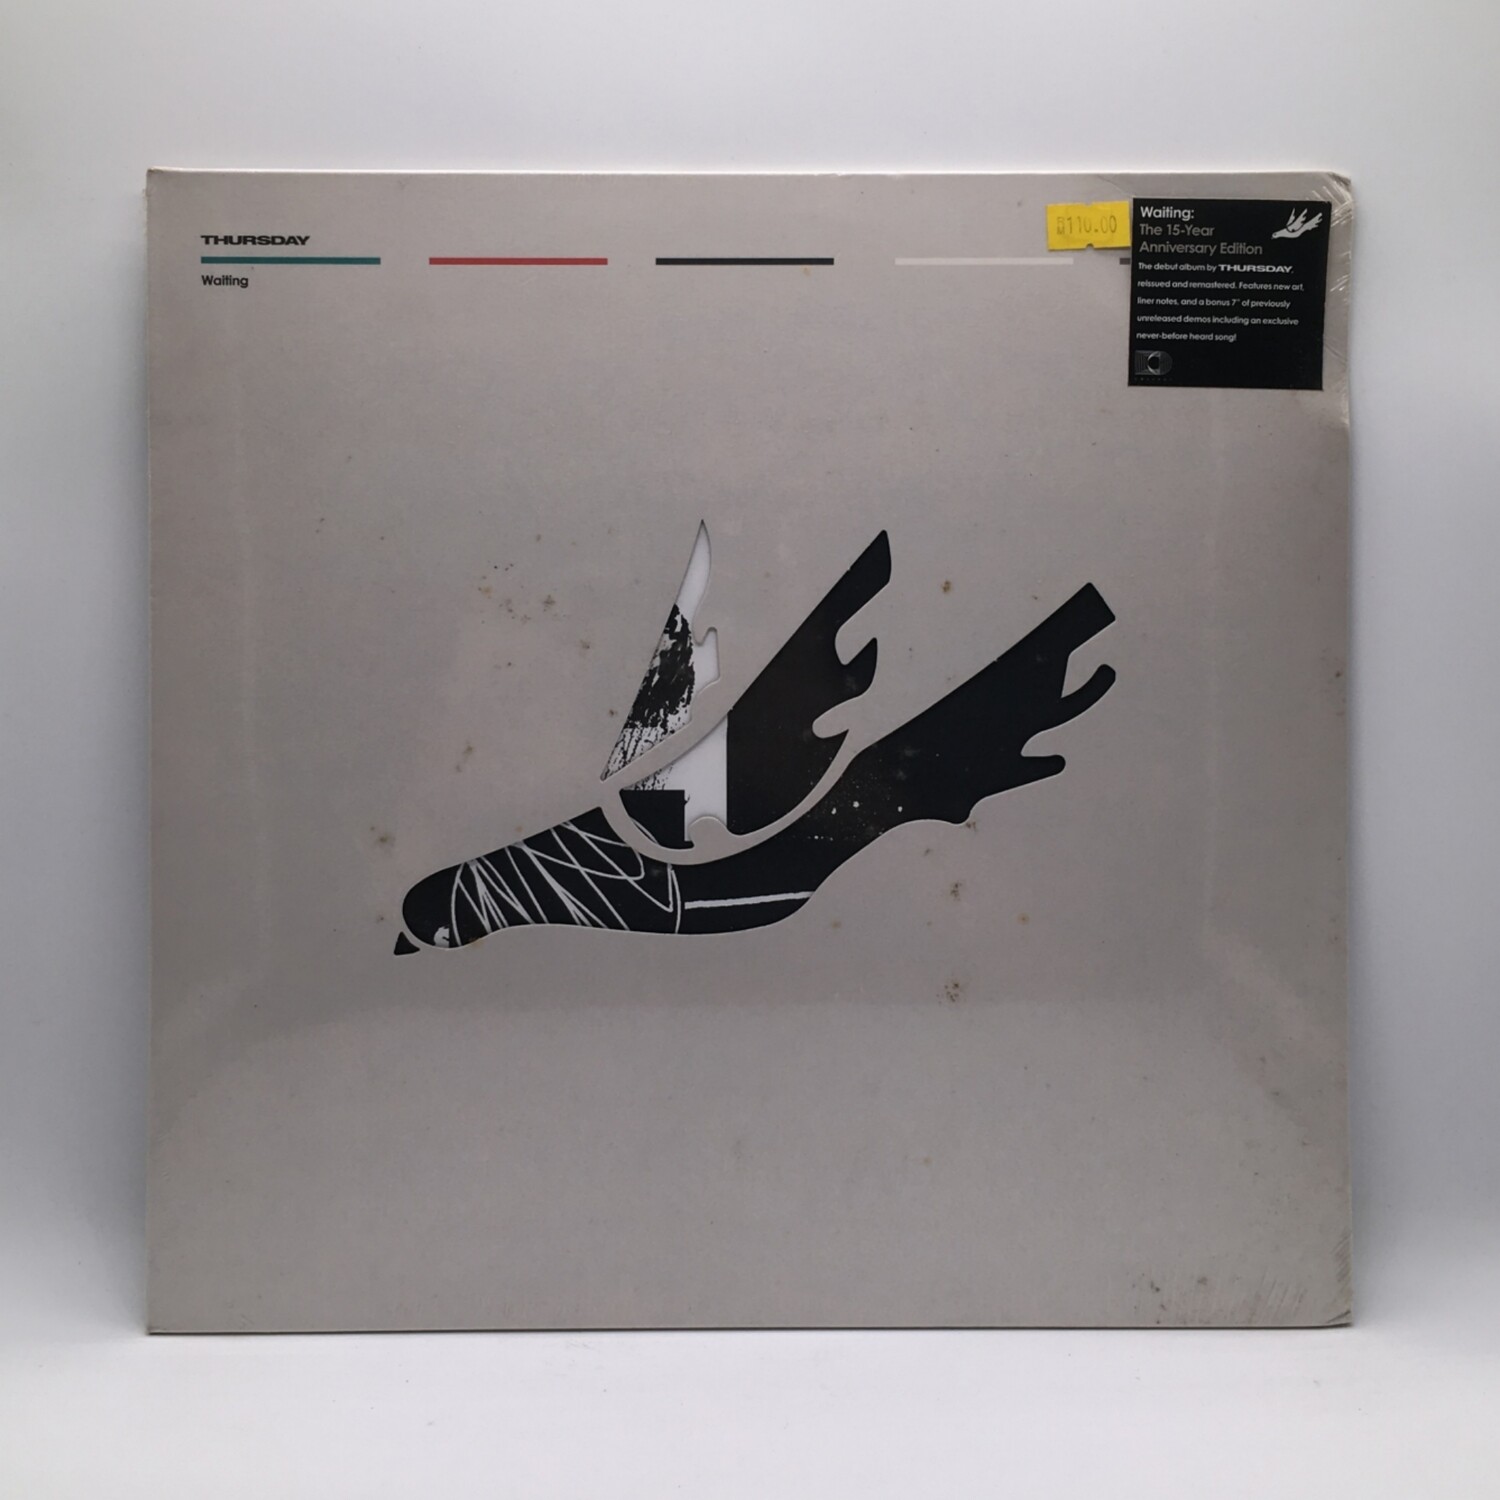 THURSDAY -WAITING: 15TH YEARS ANNIVERSARY- LP + 7 INCH